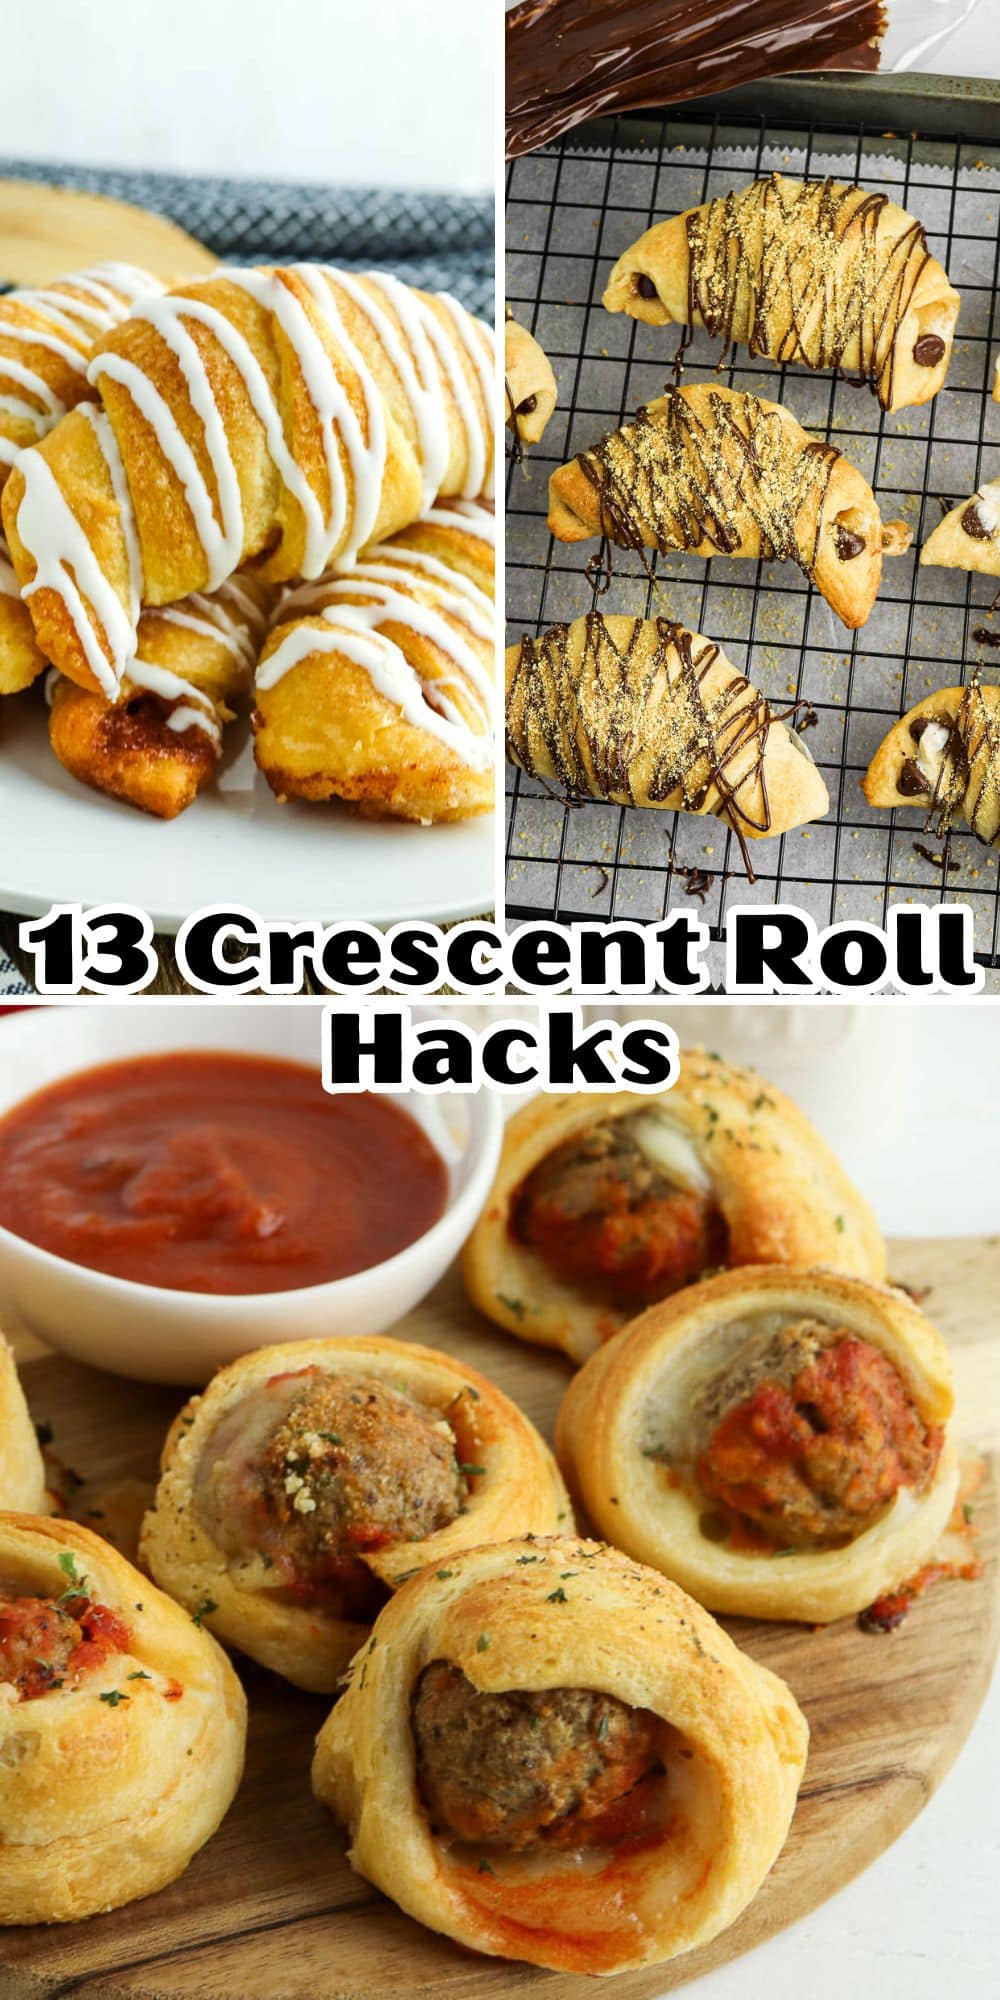 Explore 13 creative crescent roll recipes and discover amazing hacks for this versatile dough.